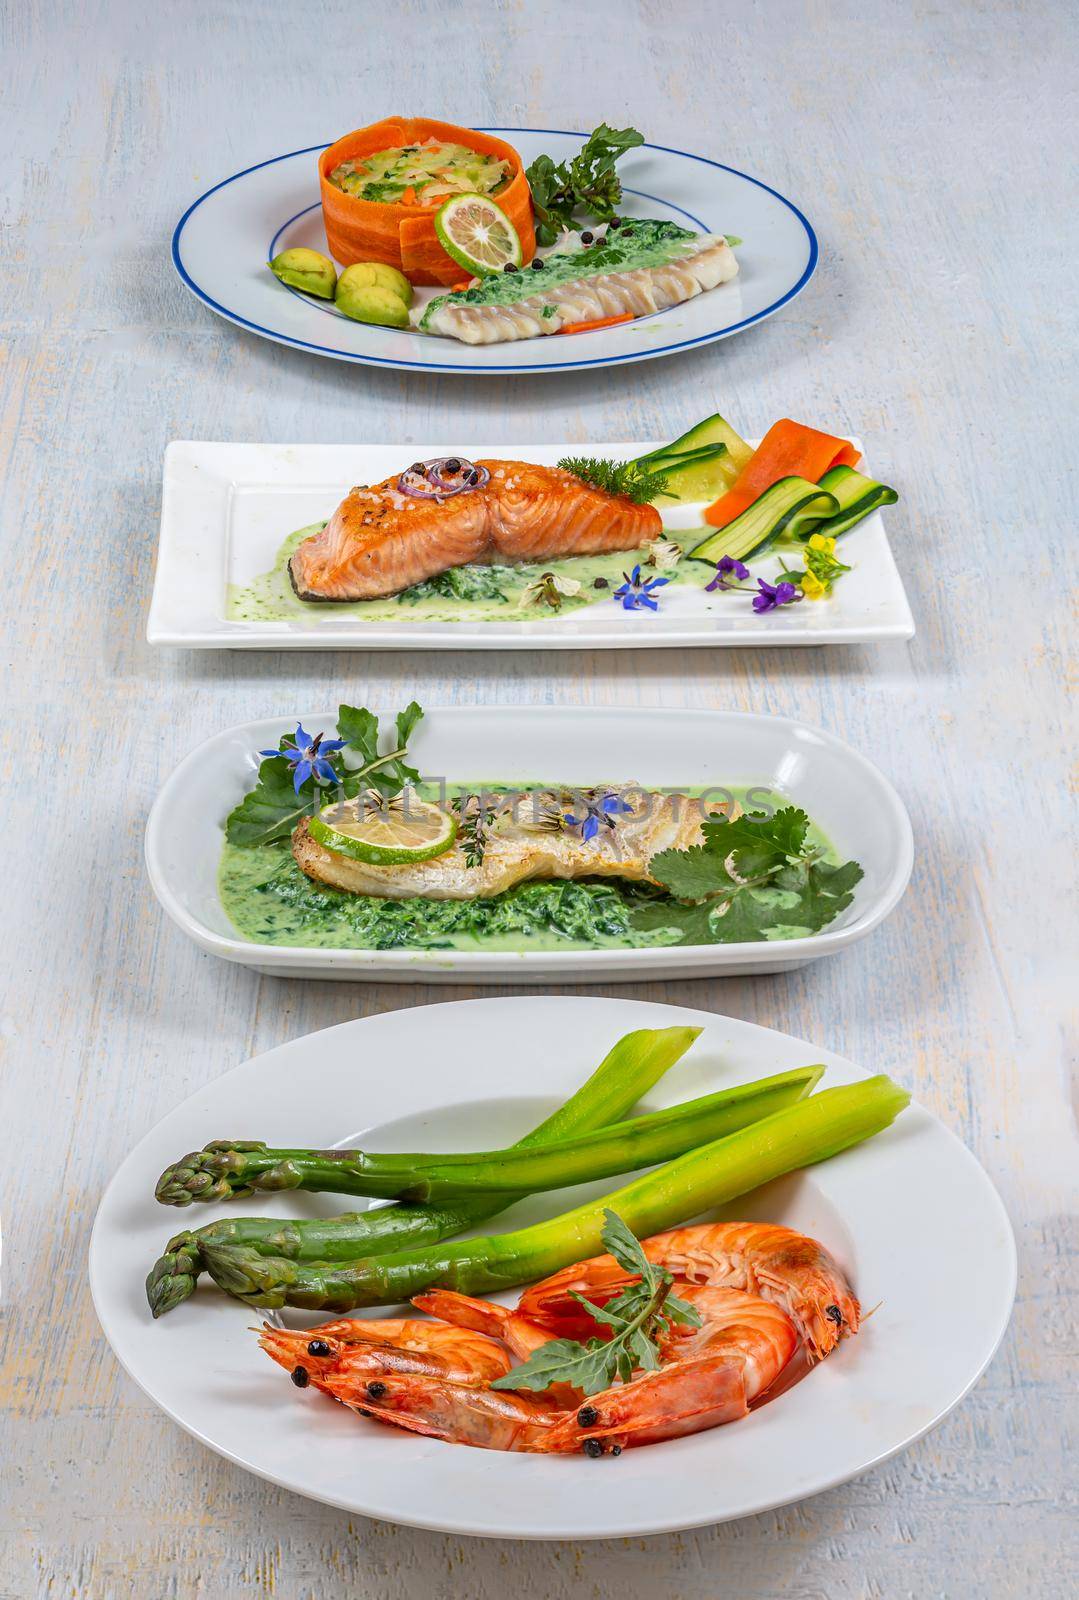 Cod, salmon, shrimp, vegetable assotis in plates in a row.